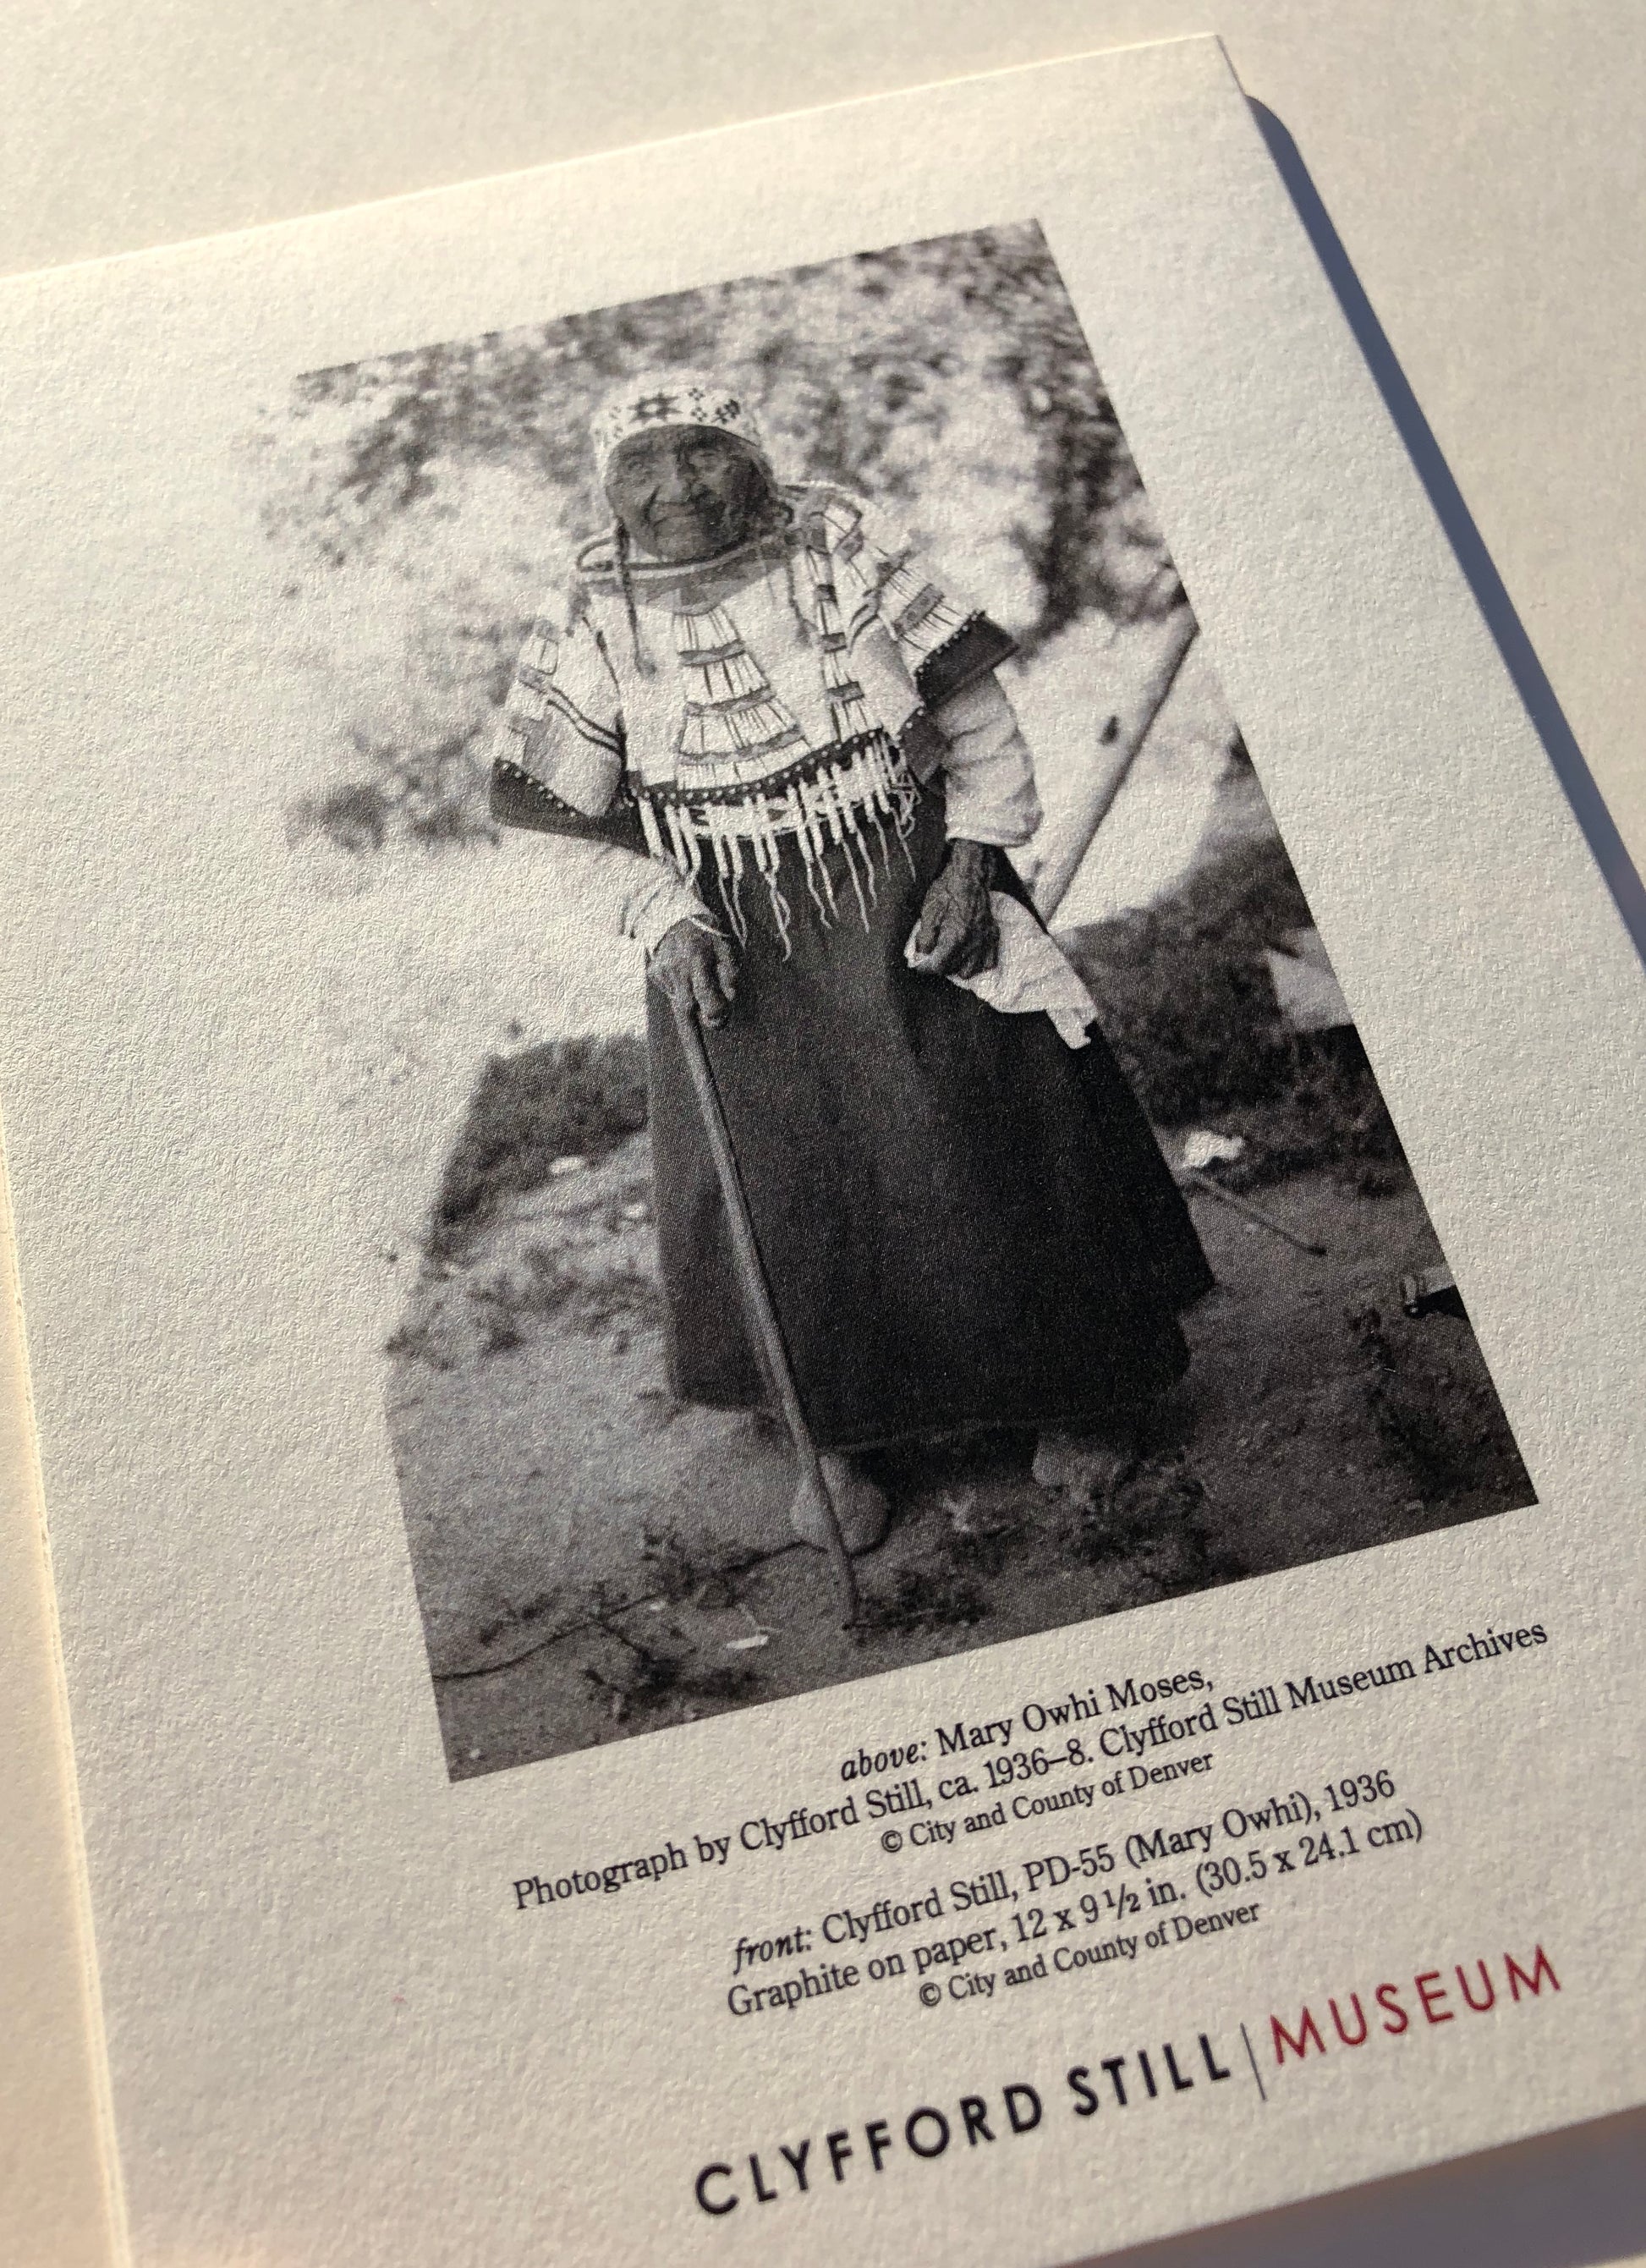 Limited edition post card featuring a photograph on the back, taken by Clyfford Still, of Mary Owhi Moses.